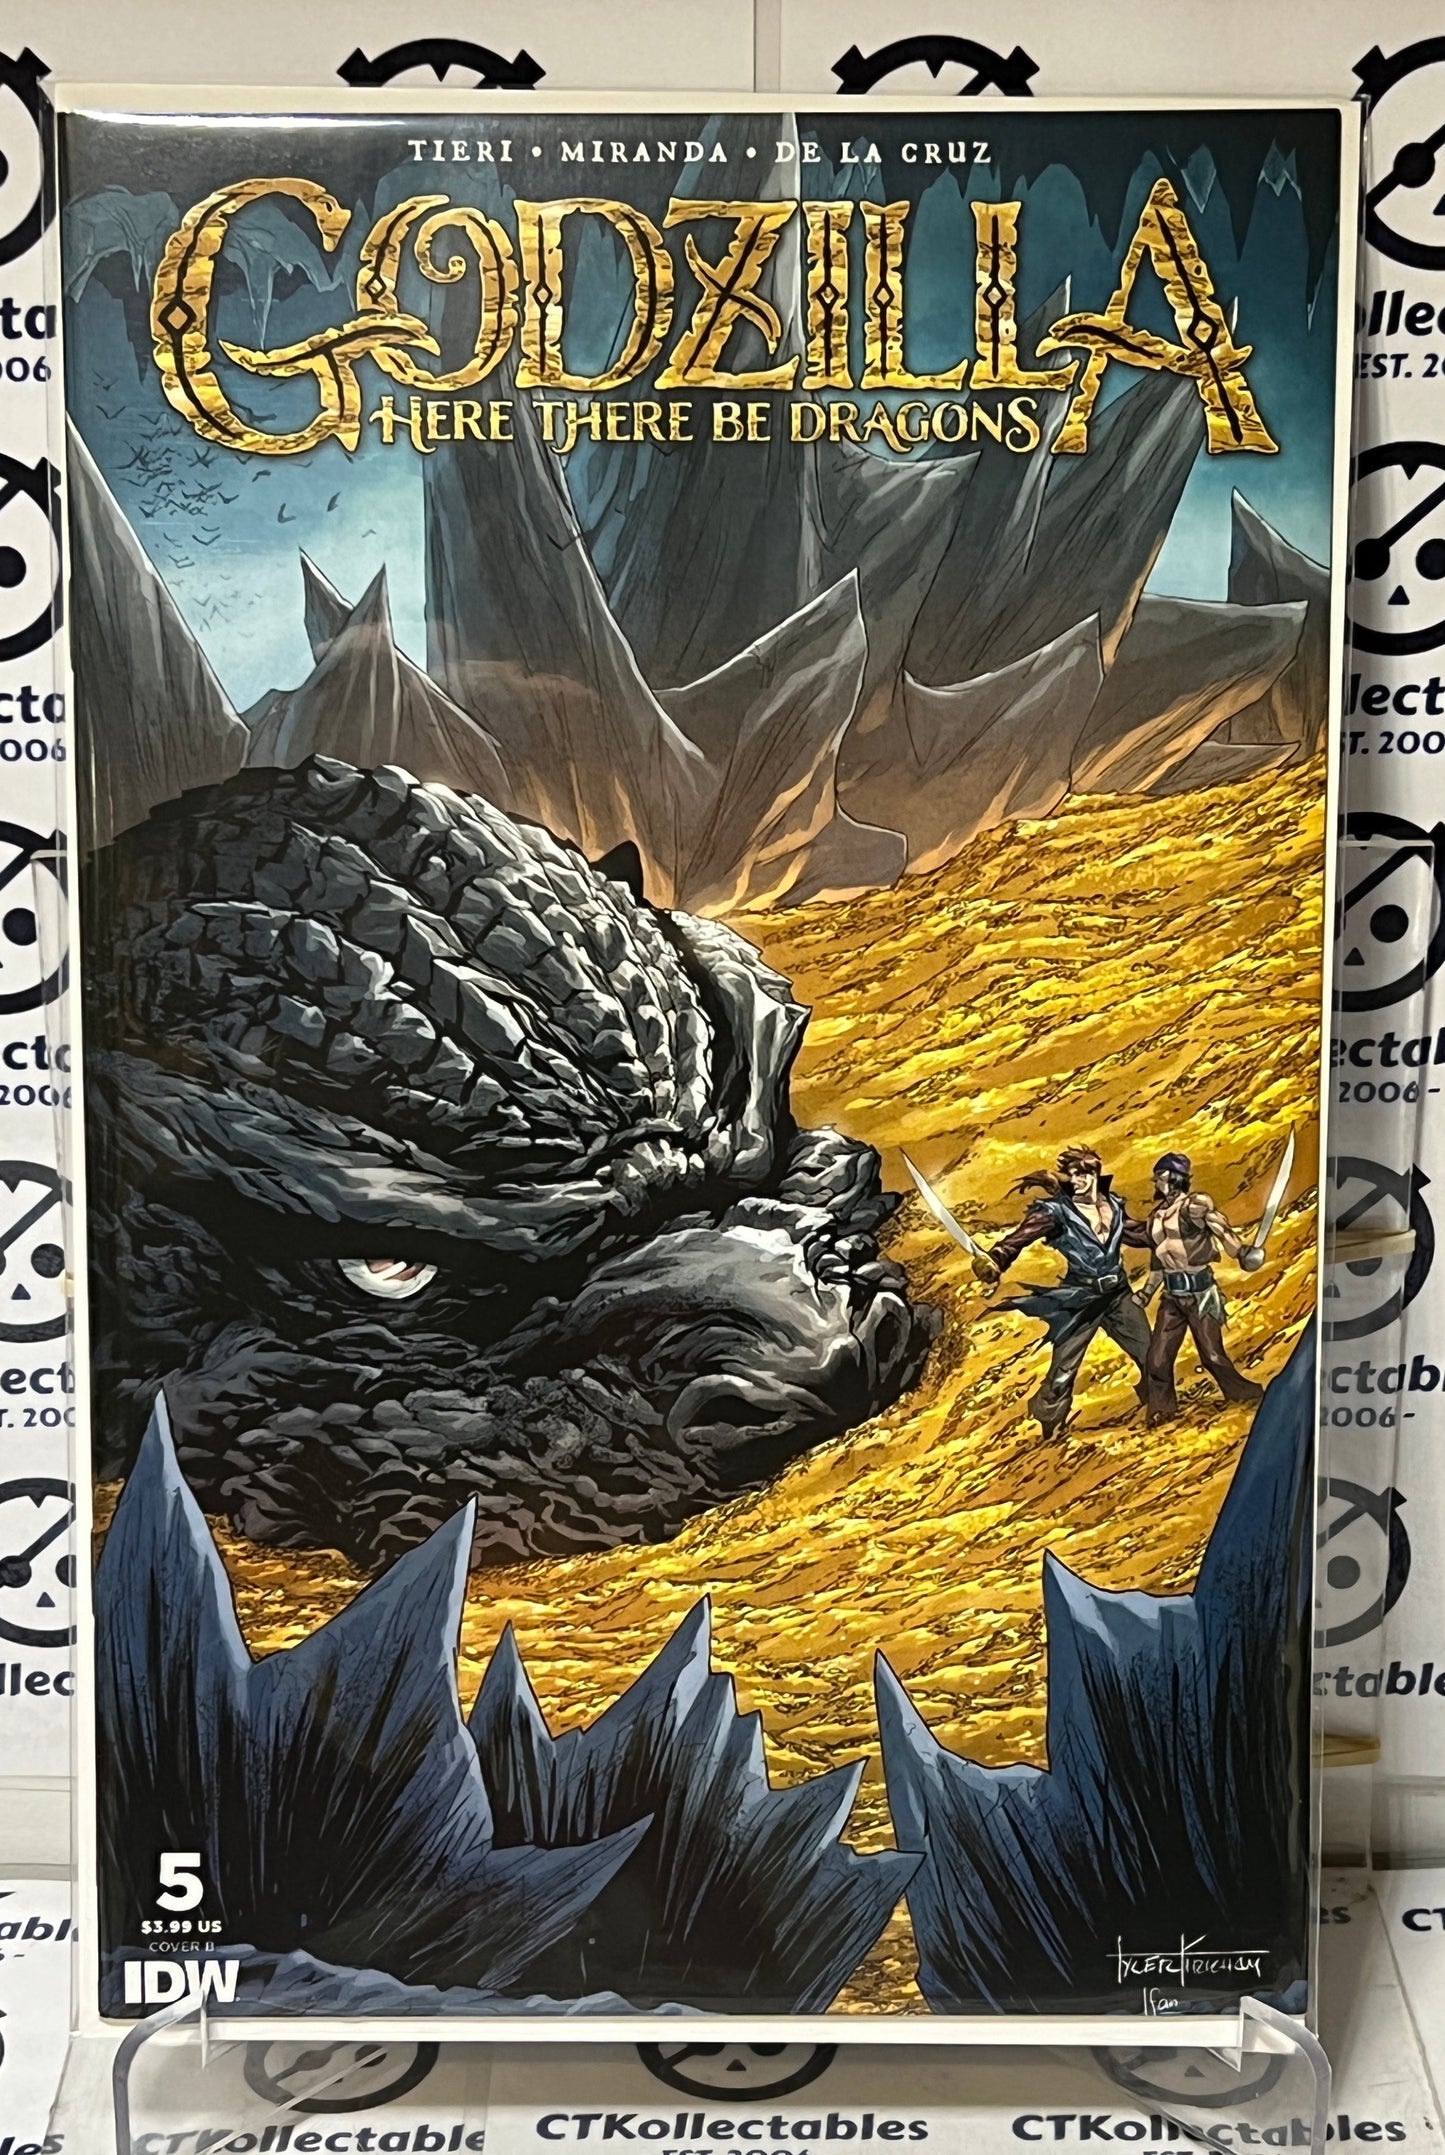 GODZILLA # 5 HERE THERE BE DRAGONS VARIANT IDW COMIC BOOK 2023